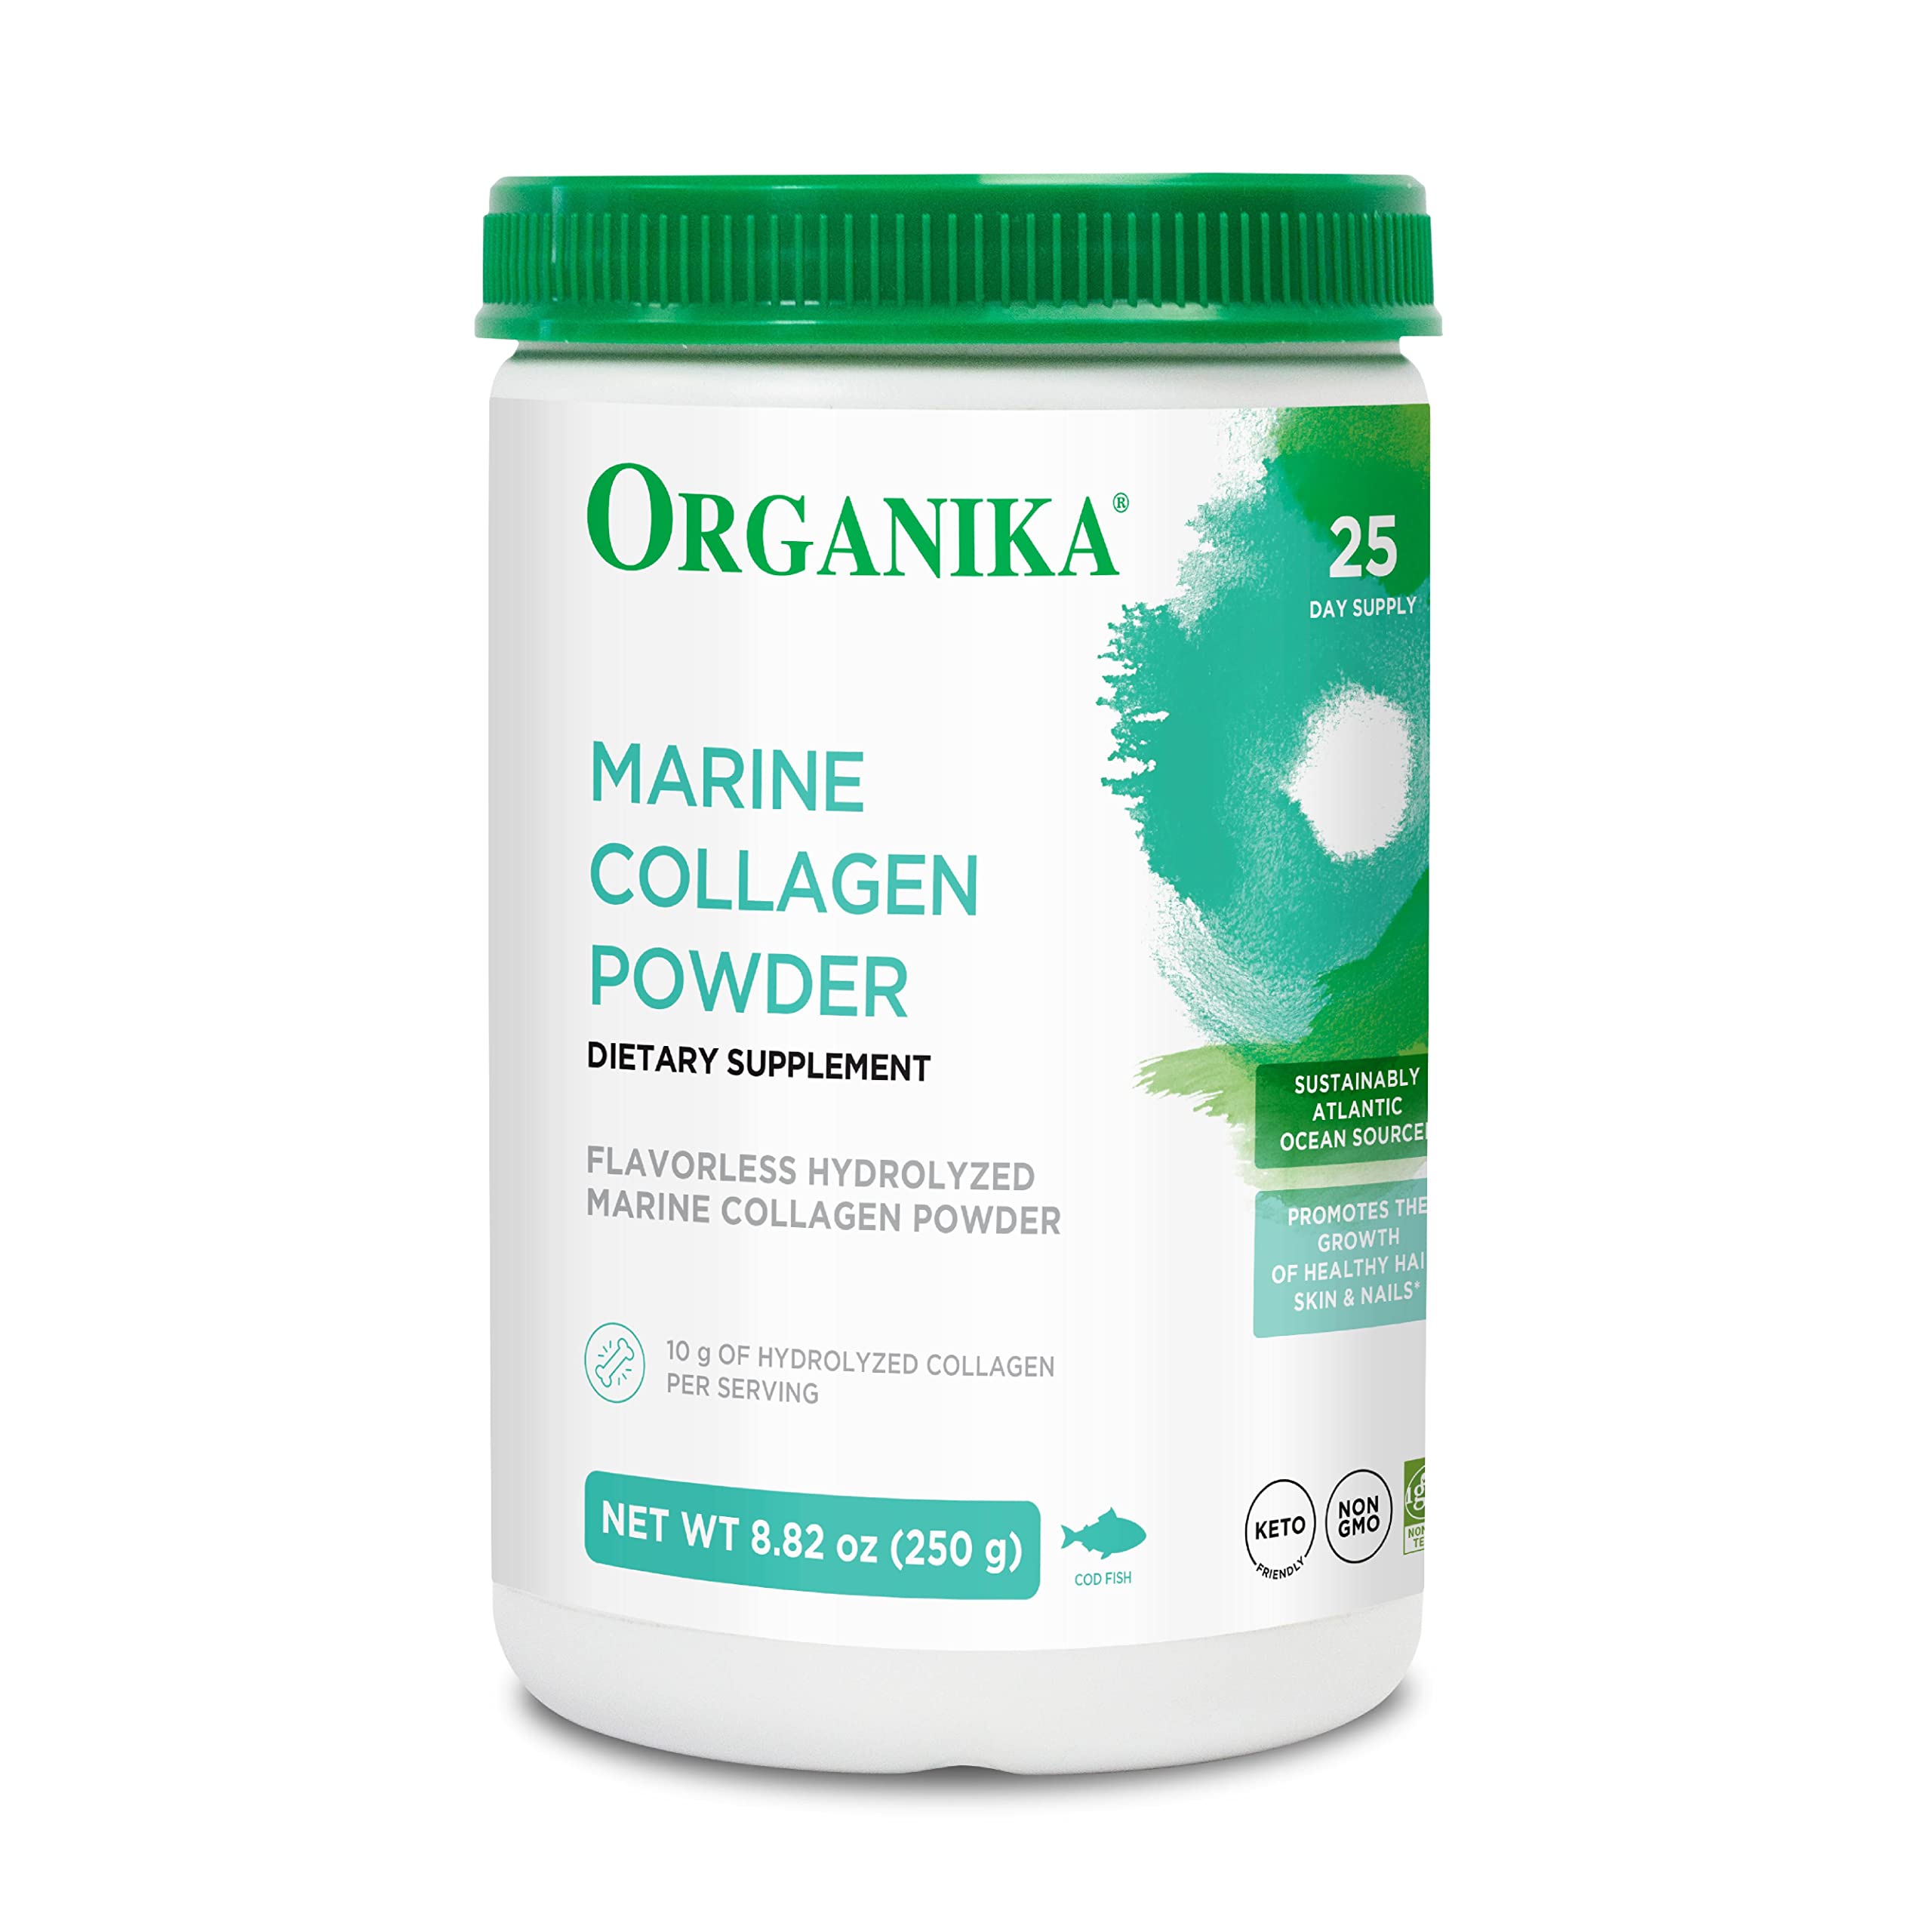 Mua Organika Marine Collagen Powder - Sourced from Wild-Caught Fish, Type 1  Collagen for Hair, Skin, Nails - Unflavored, Easy to Mix  (250g)  trên Amazon Mỹ chính hãng 2023 | Giaonhan247